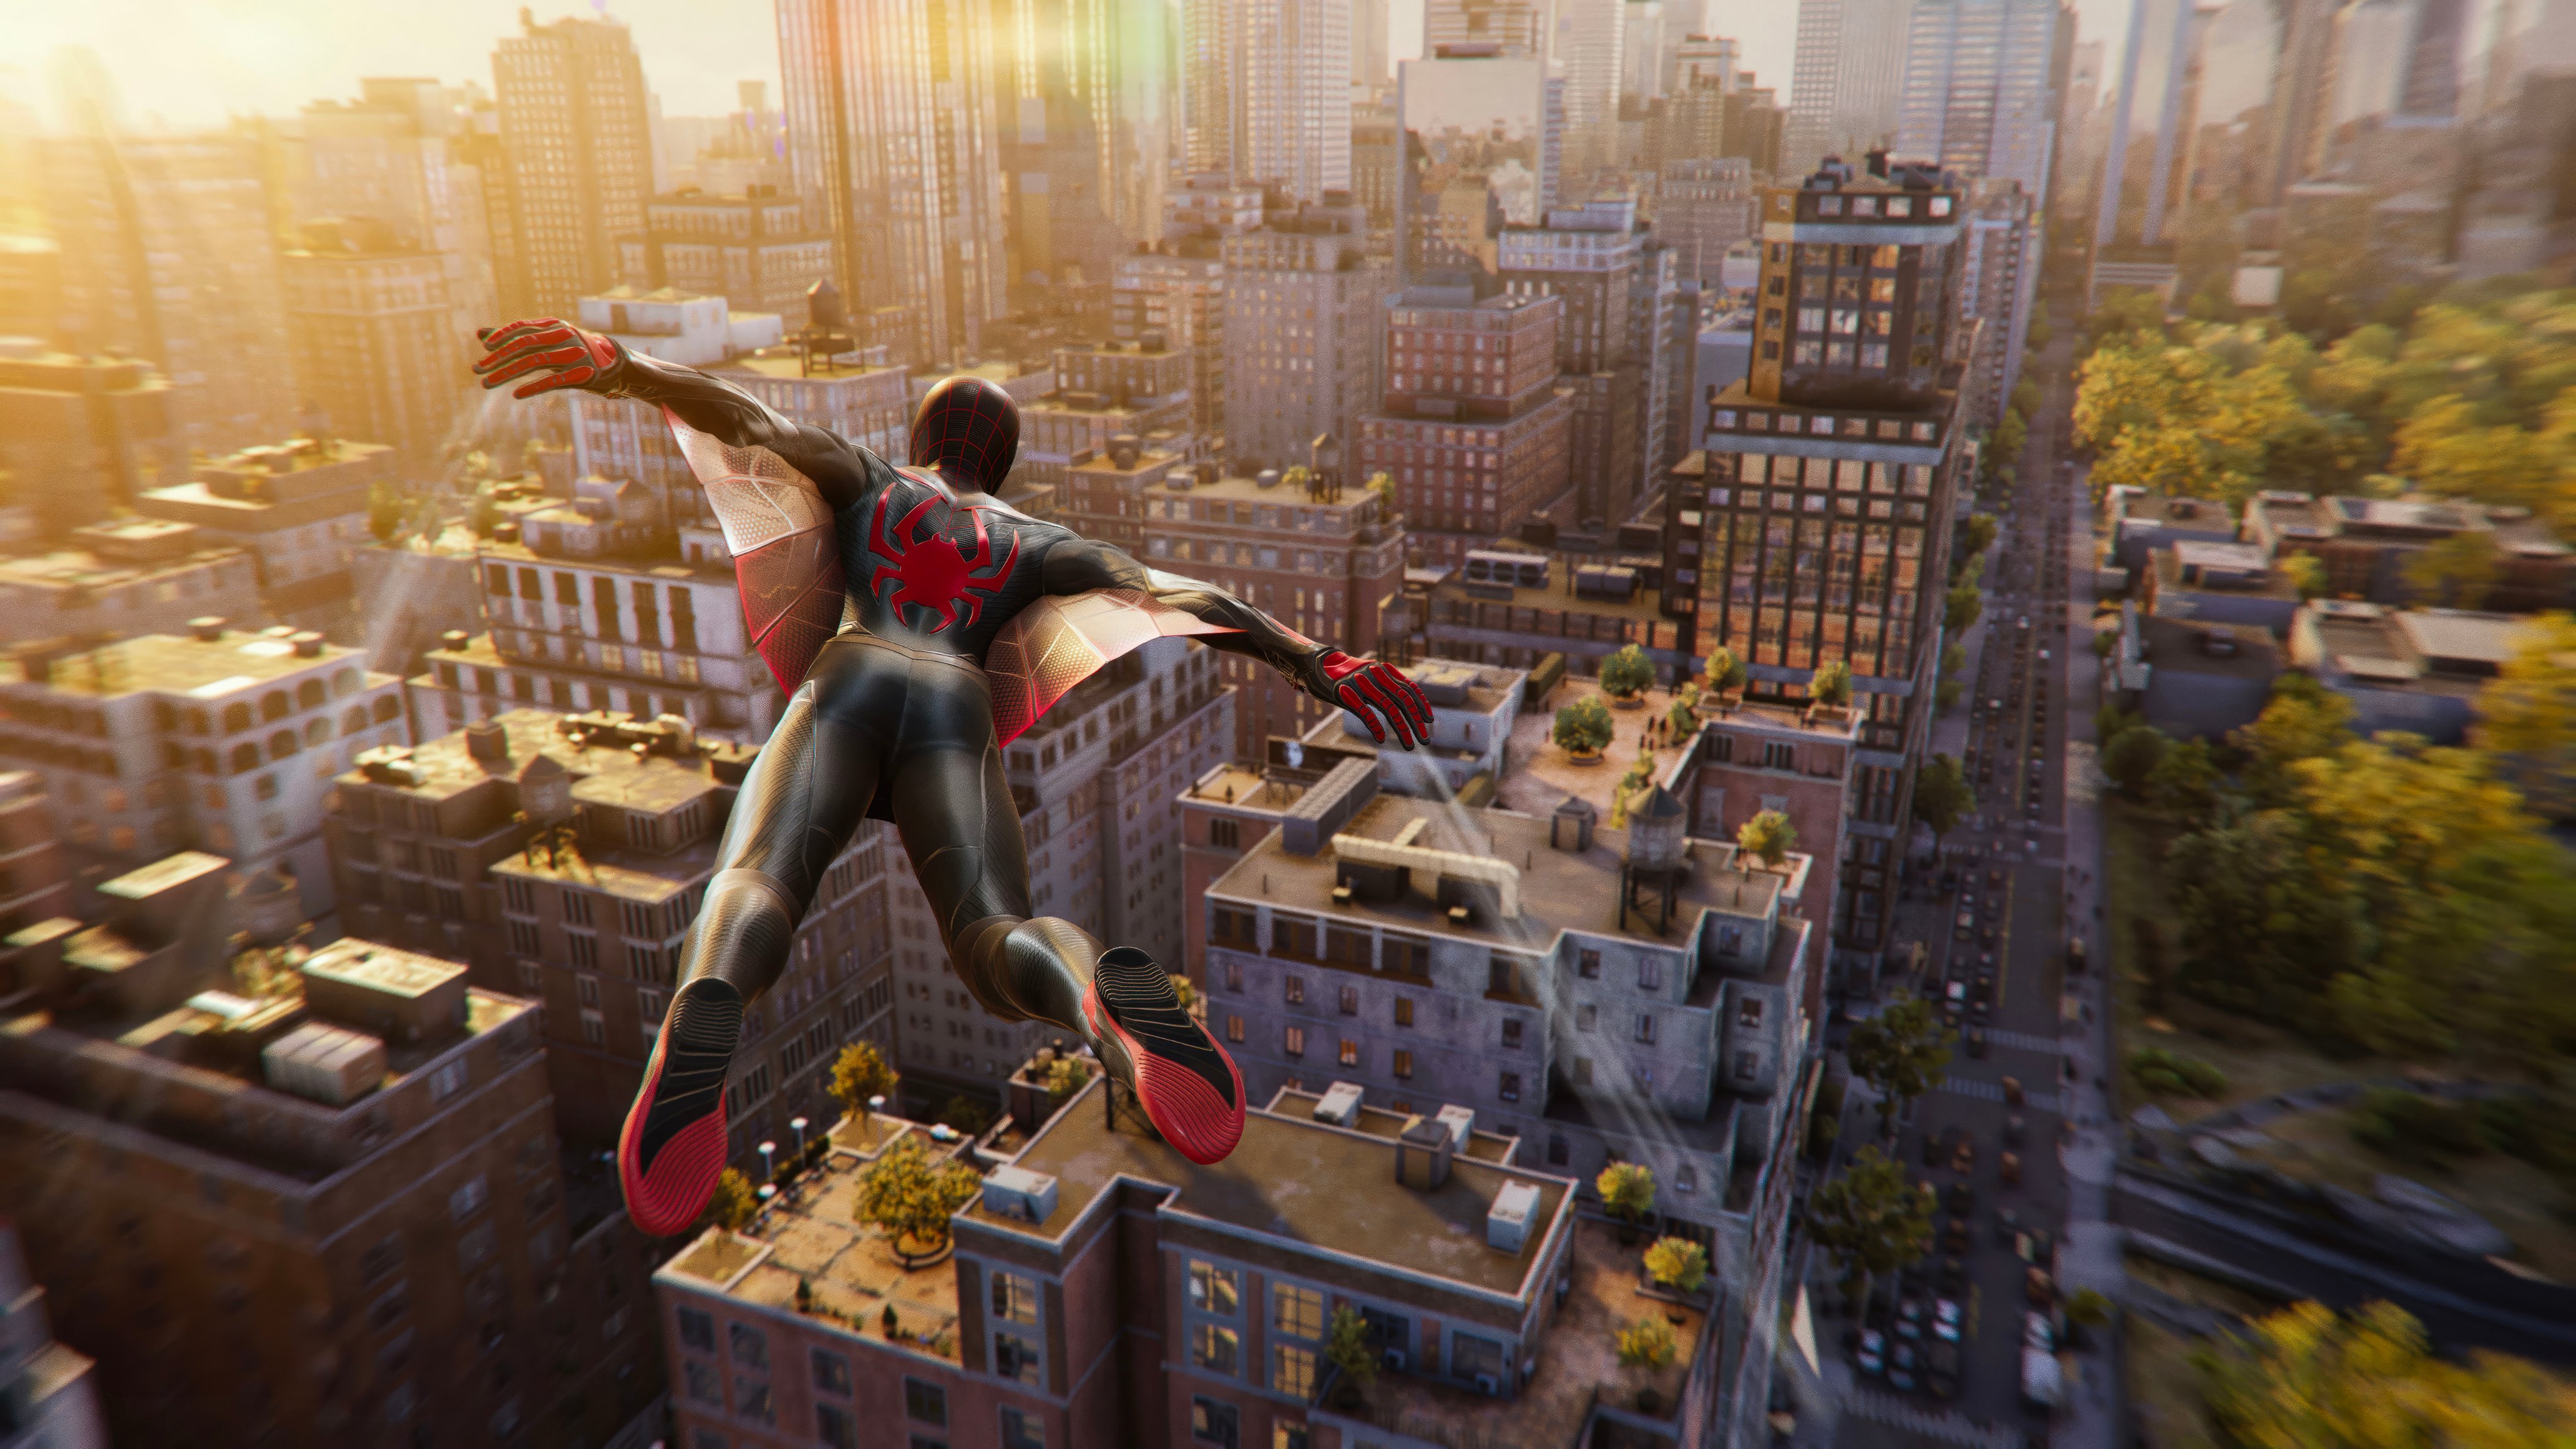 Spider-Man 2: Release Date, Gameplay Updates, Story Details, and